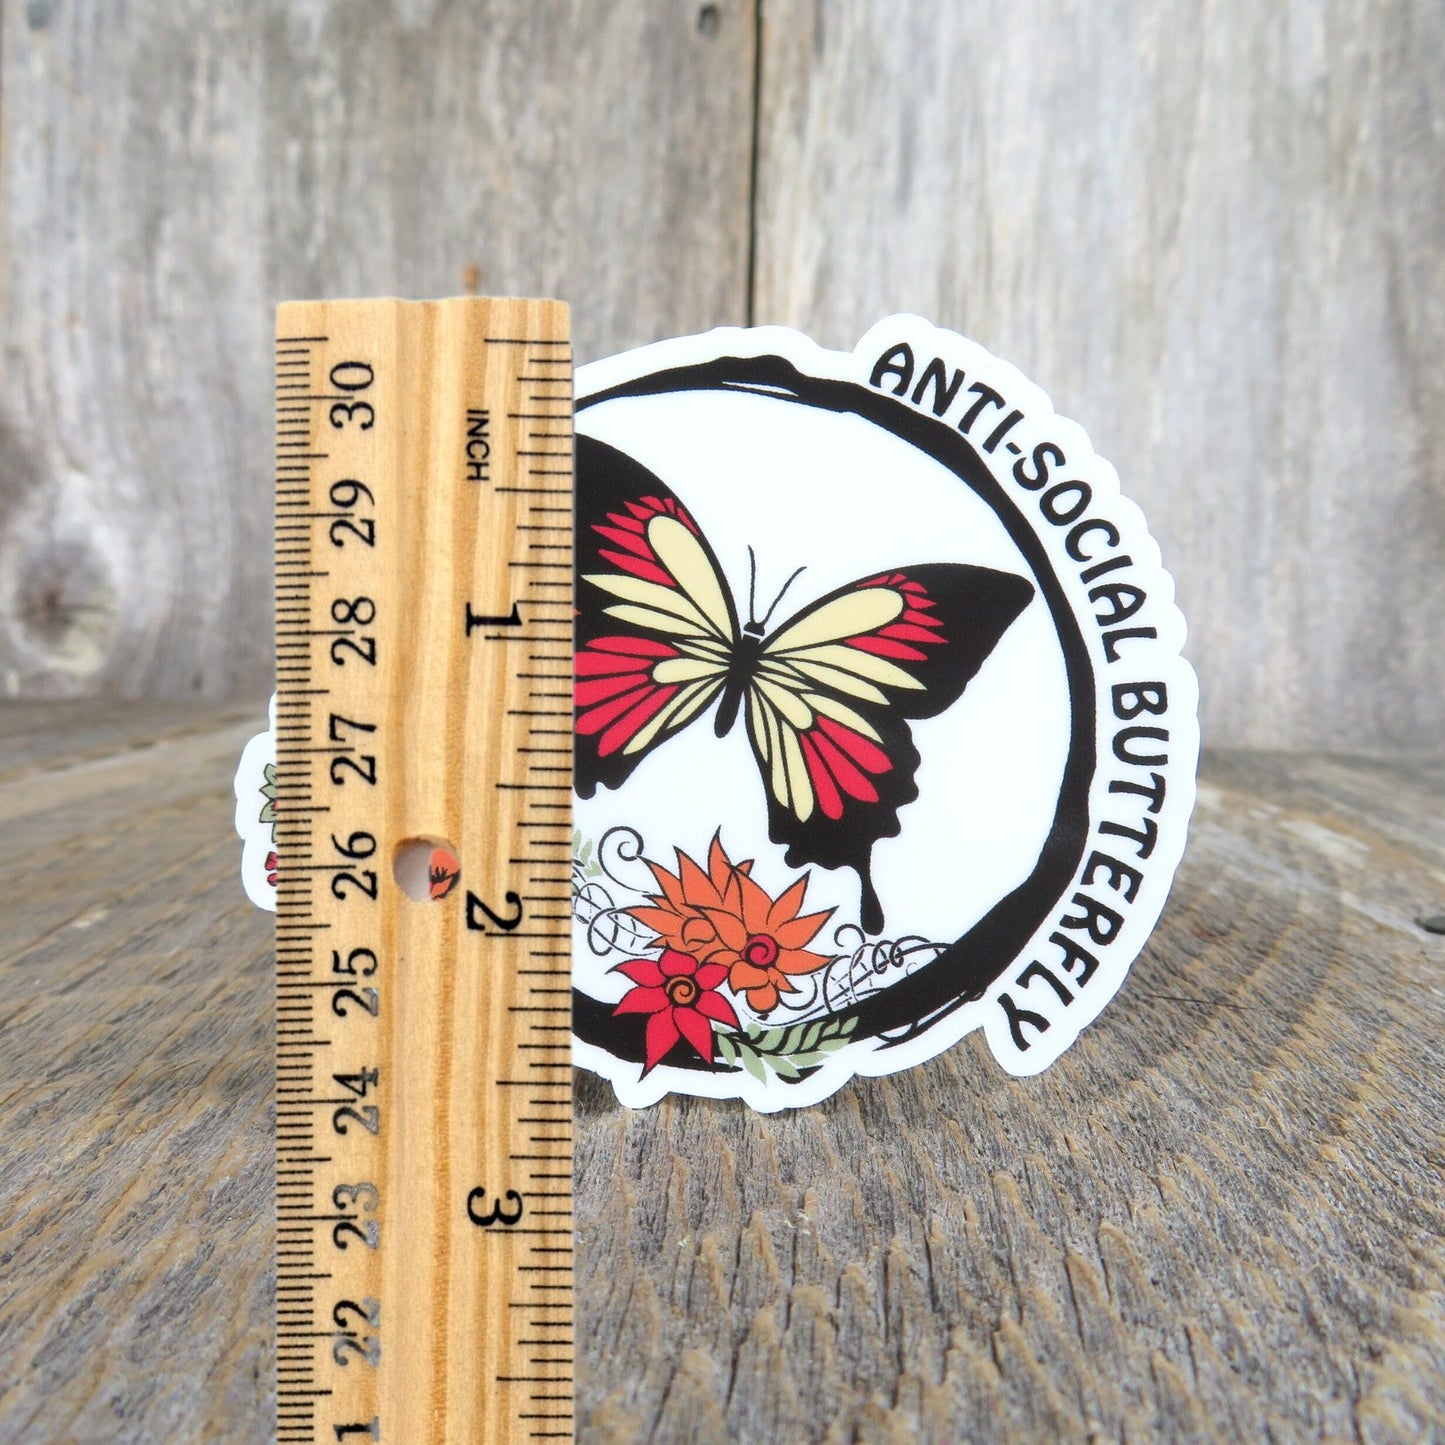 Anti-Social Butterfly Sticker Fall Colors and Flowers Waterproof Funny Sarcastic Sayings Introverts